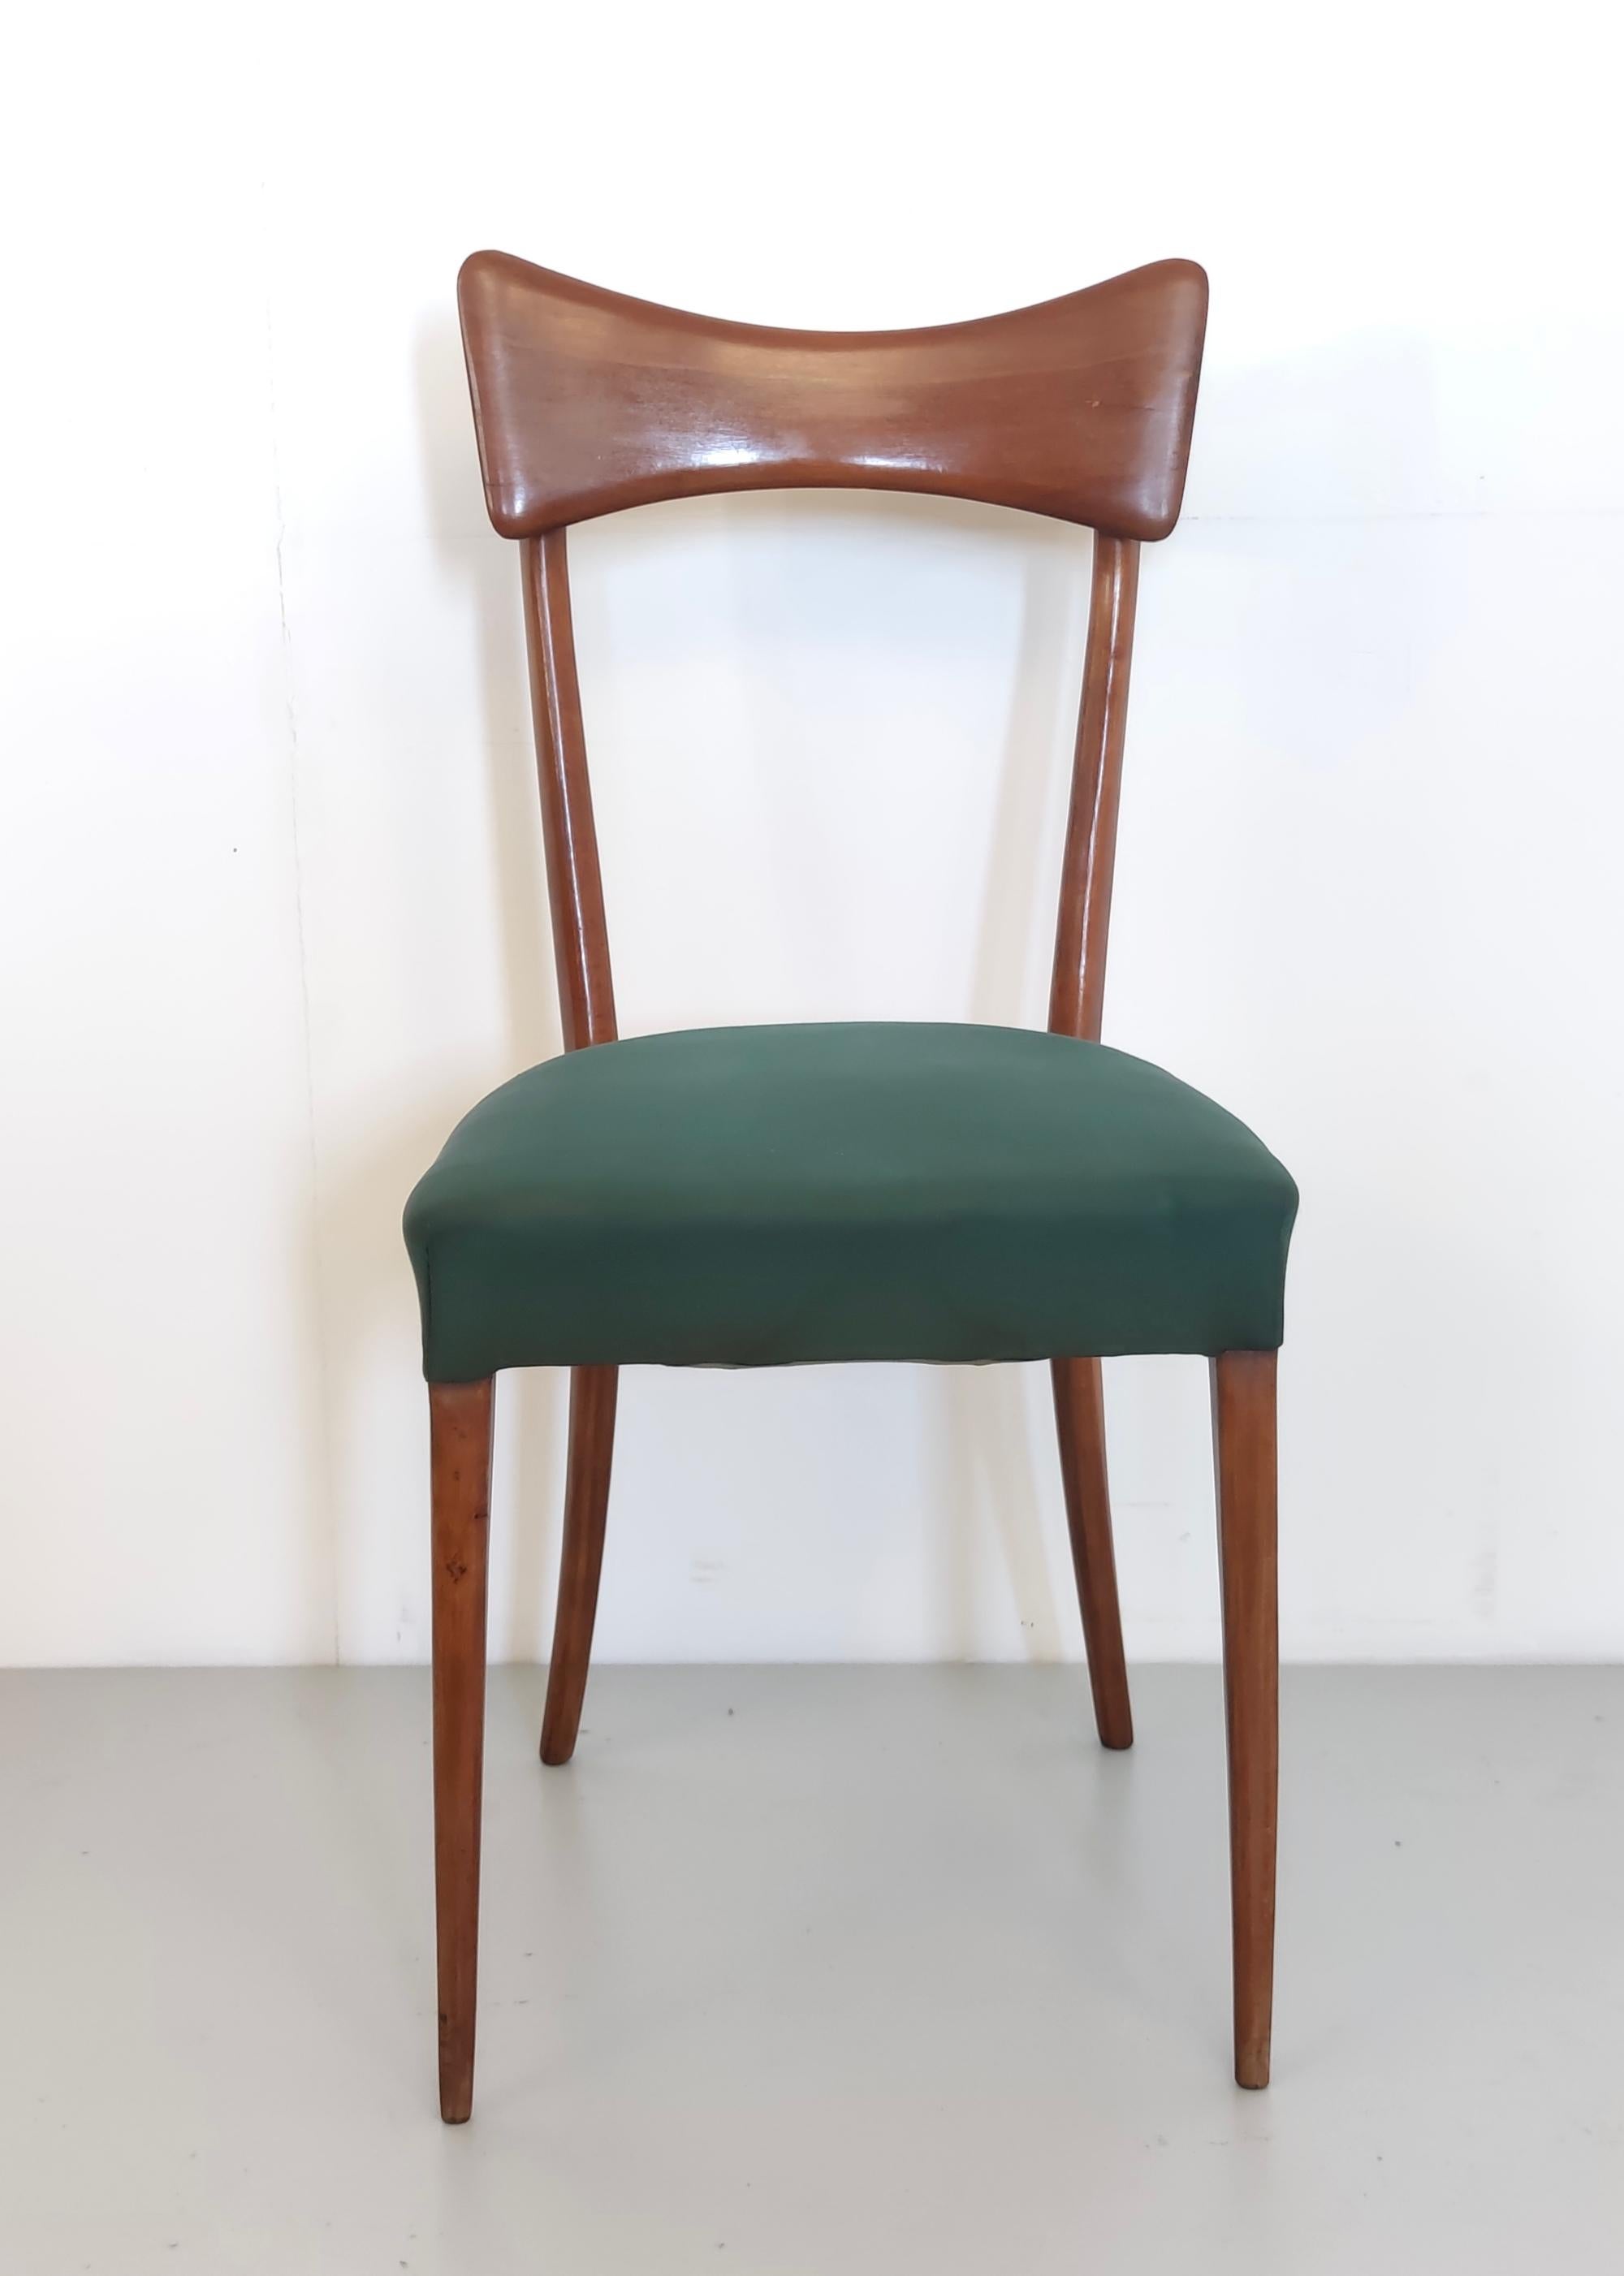 Pair of Vintage Side Chairs attributed to Ico Parisi for Ariberto Colombo, Italy In Good Condition For Sale In Bresso, Lombardy